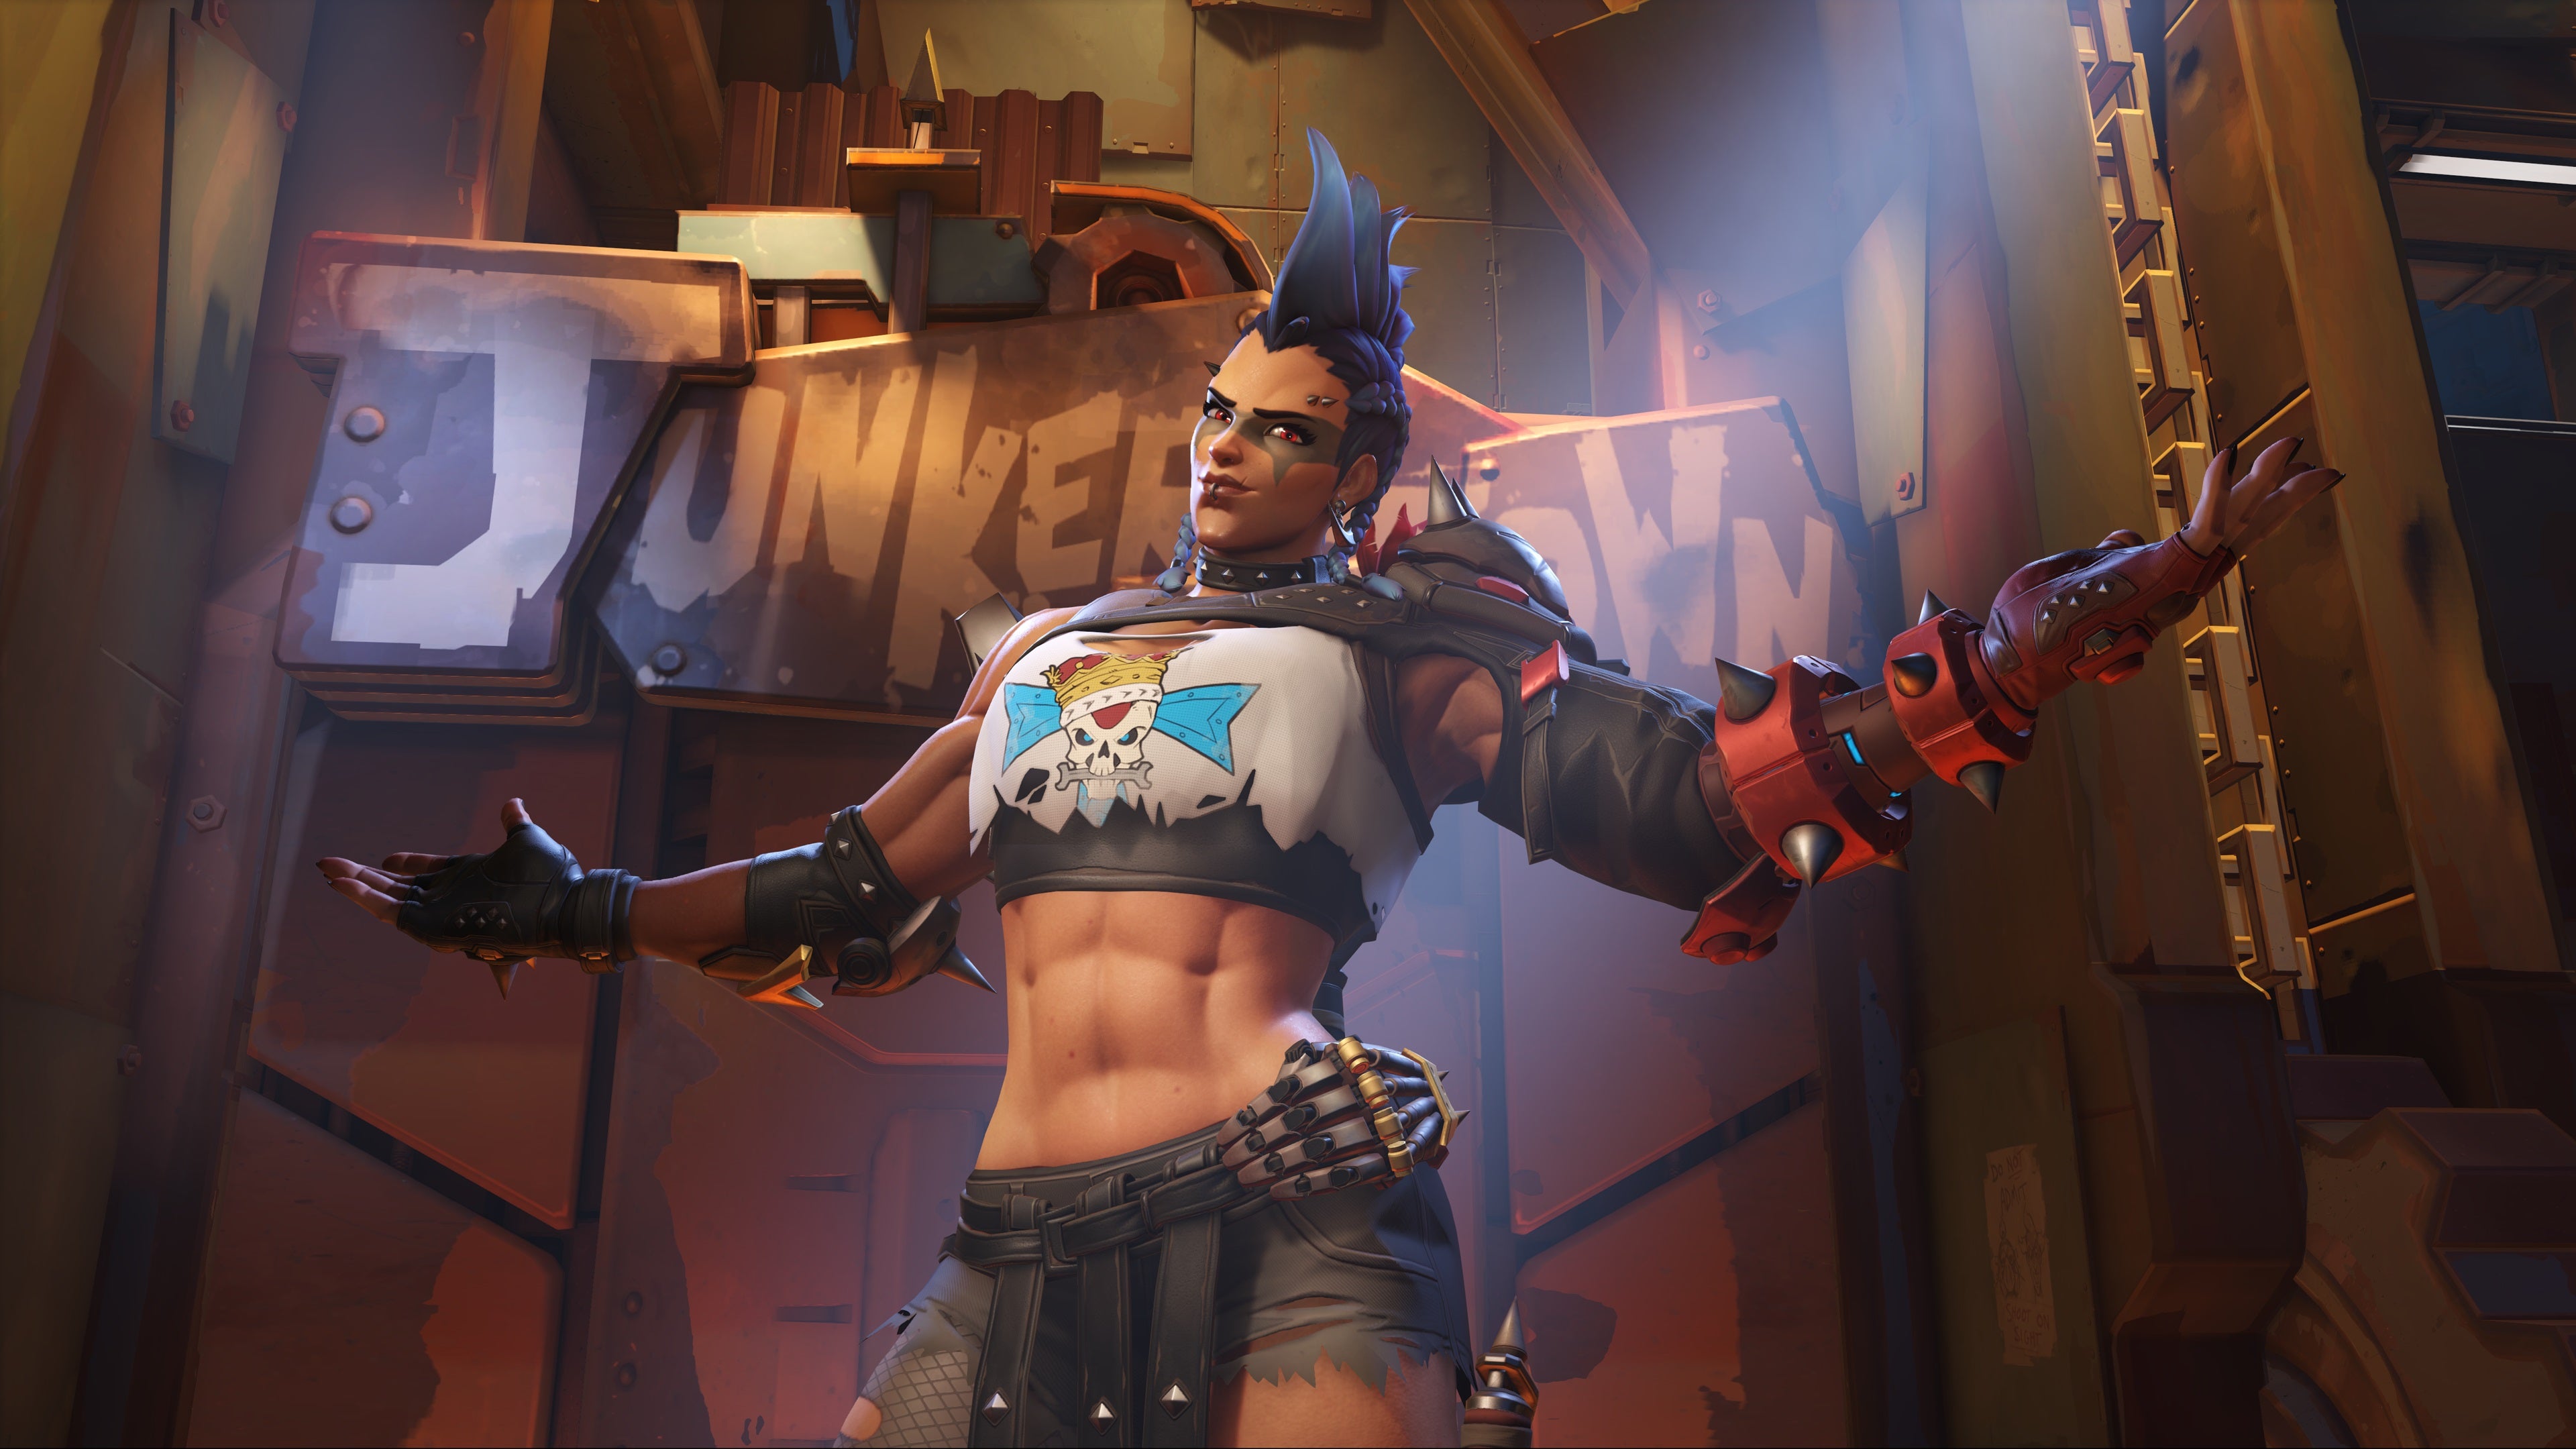 Muscled Overwatch 2 hero Junker Queen shrugs to the camera.